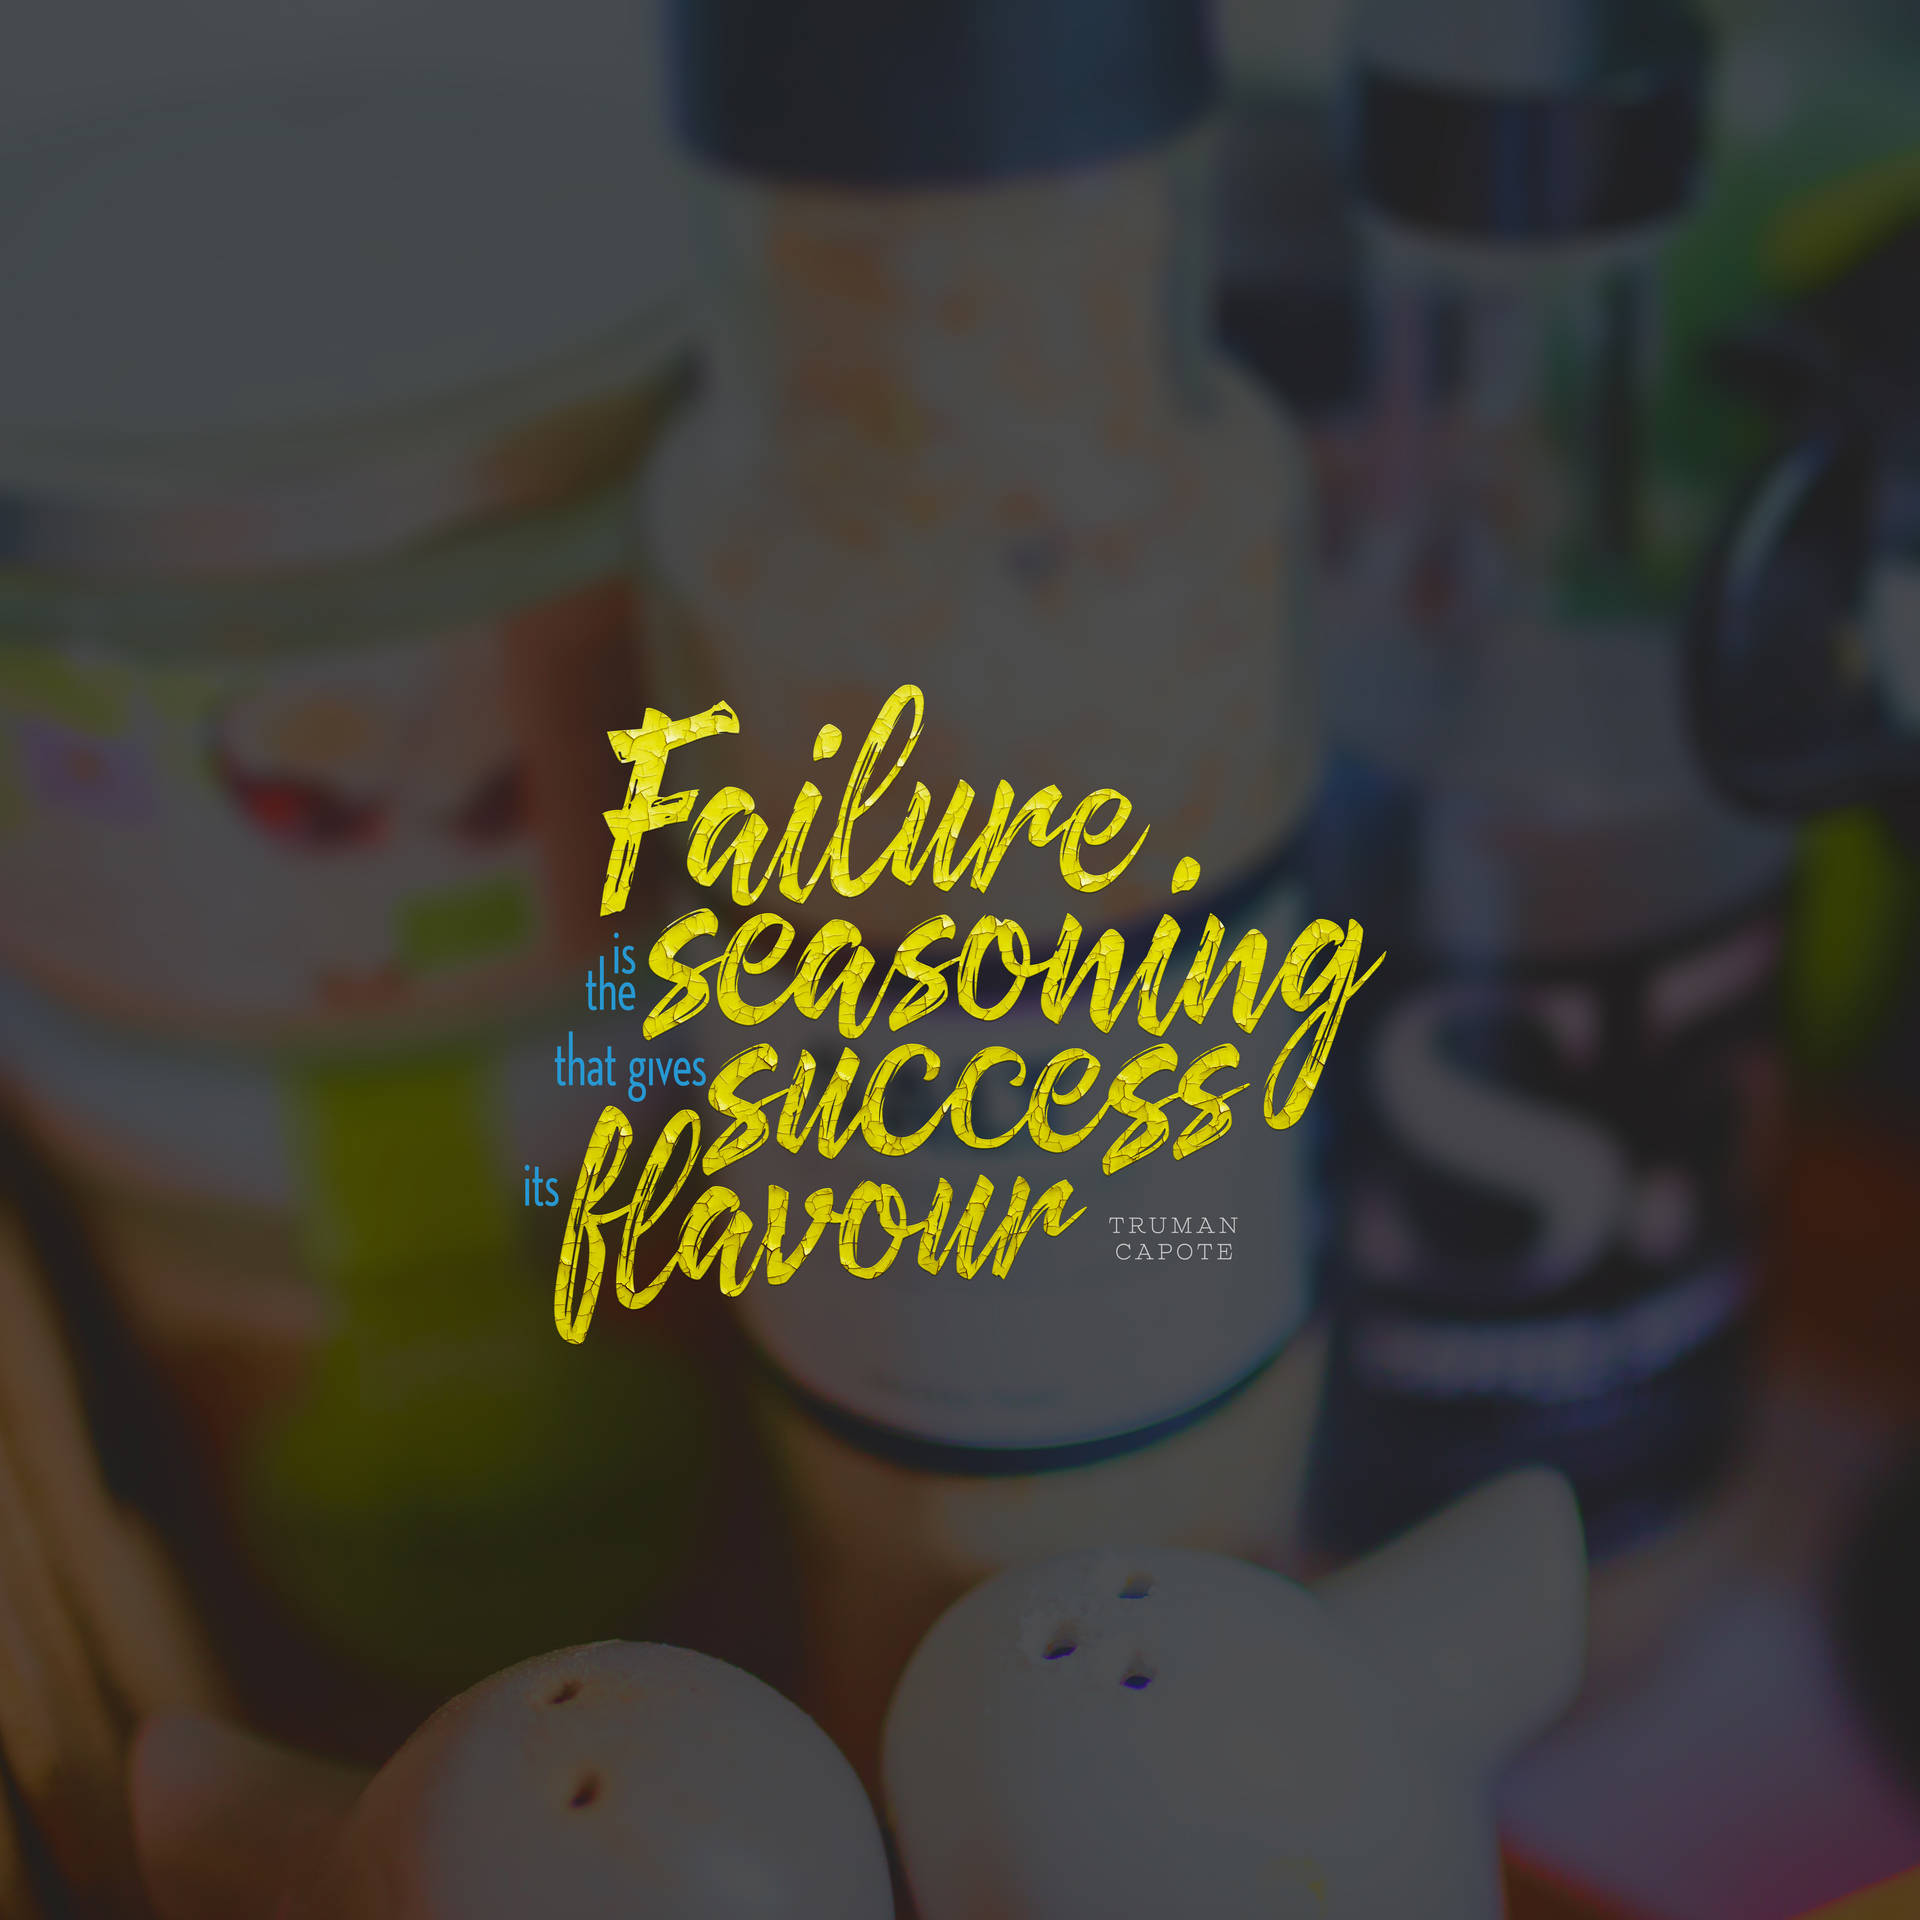 "Failure is the condiment that gives success its flavor." - Truman Capote Wallpaper